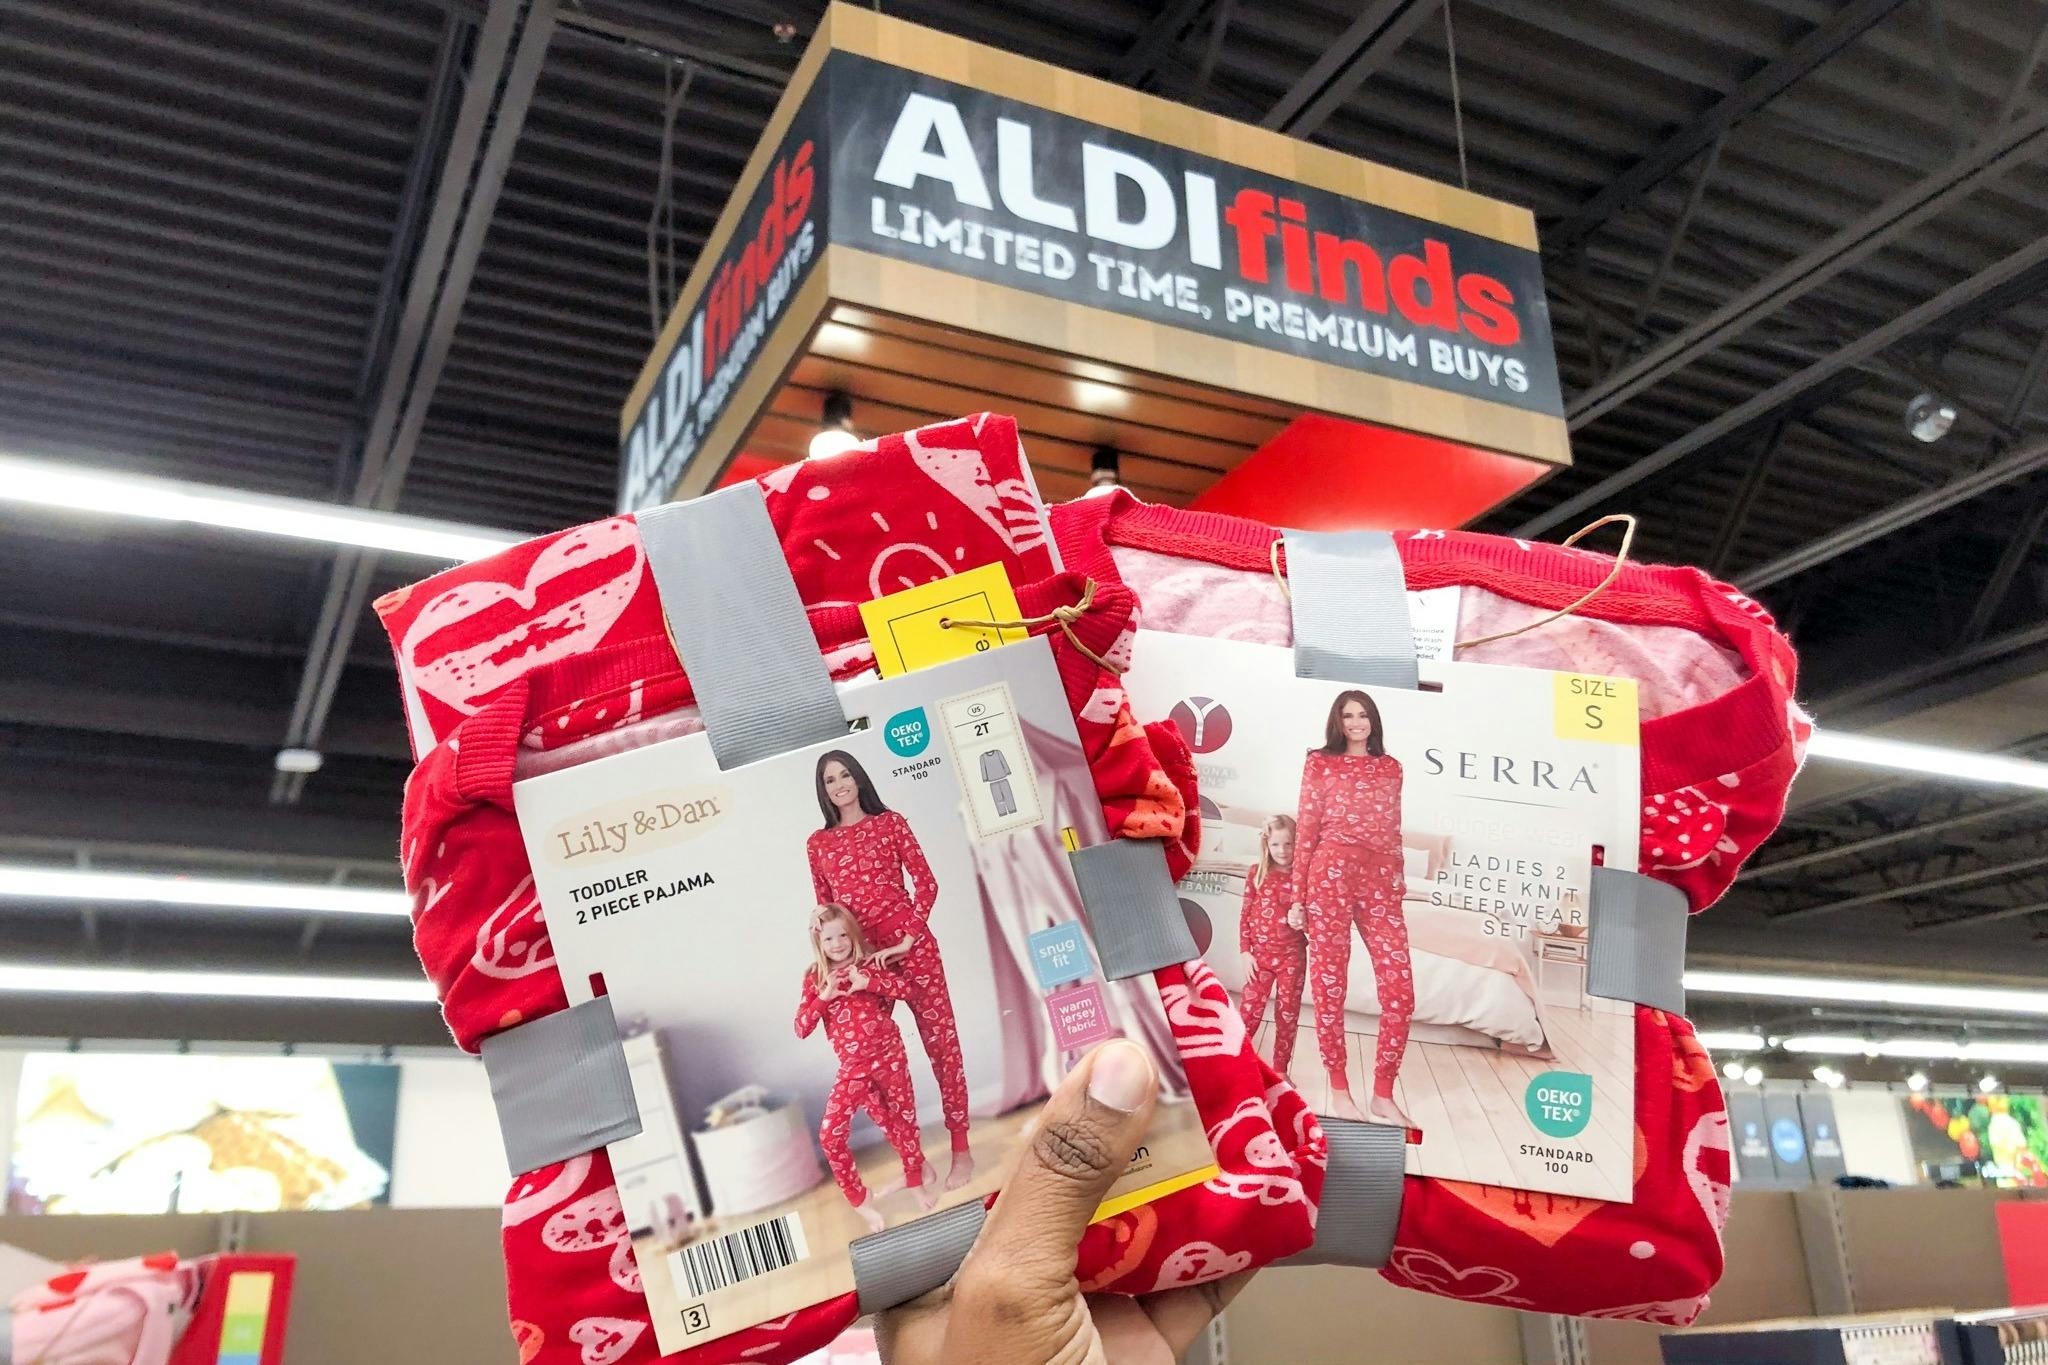 Aldi Valentine’s Day Deals: 6-Stem Roses for $4, Pj's as Low as $8 ...